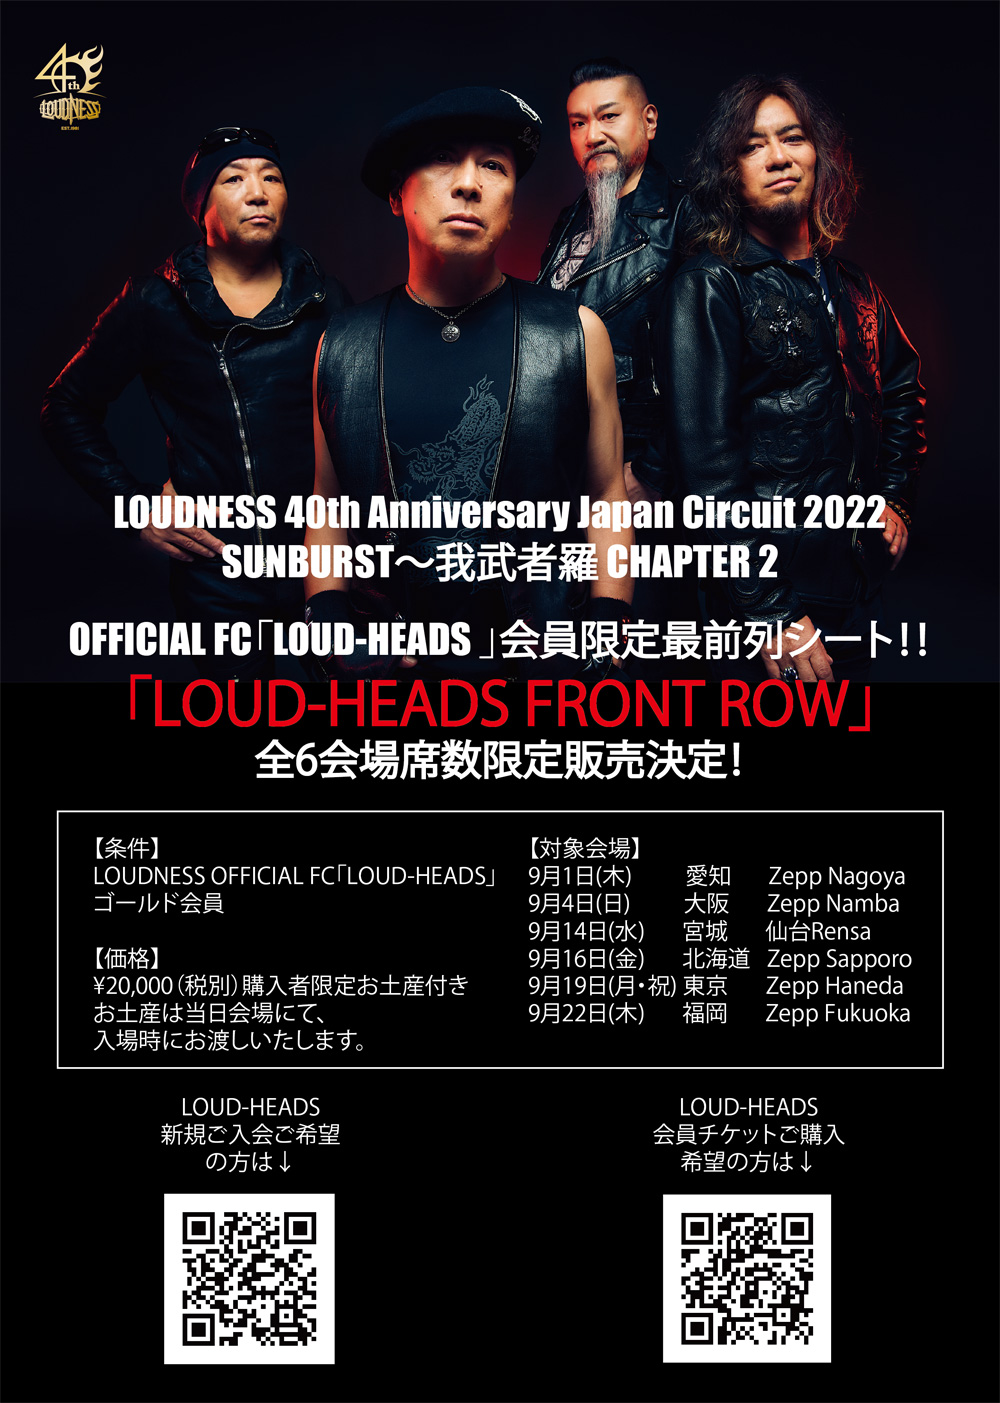 LOUDNESS - Official Website -